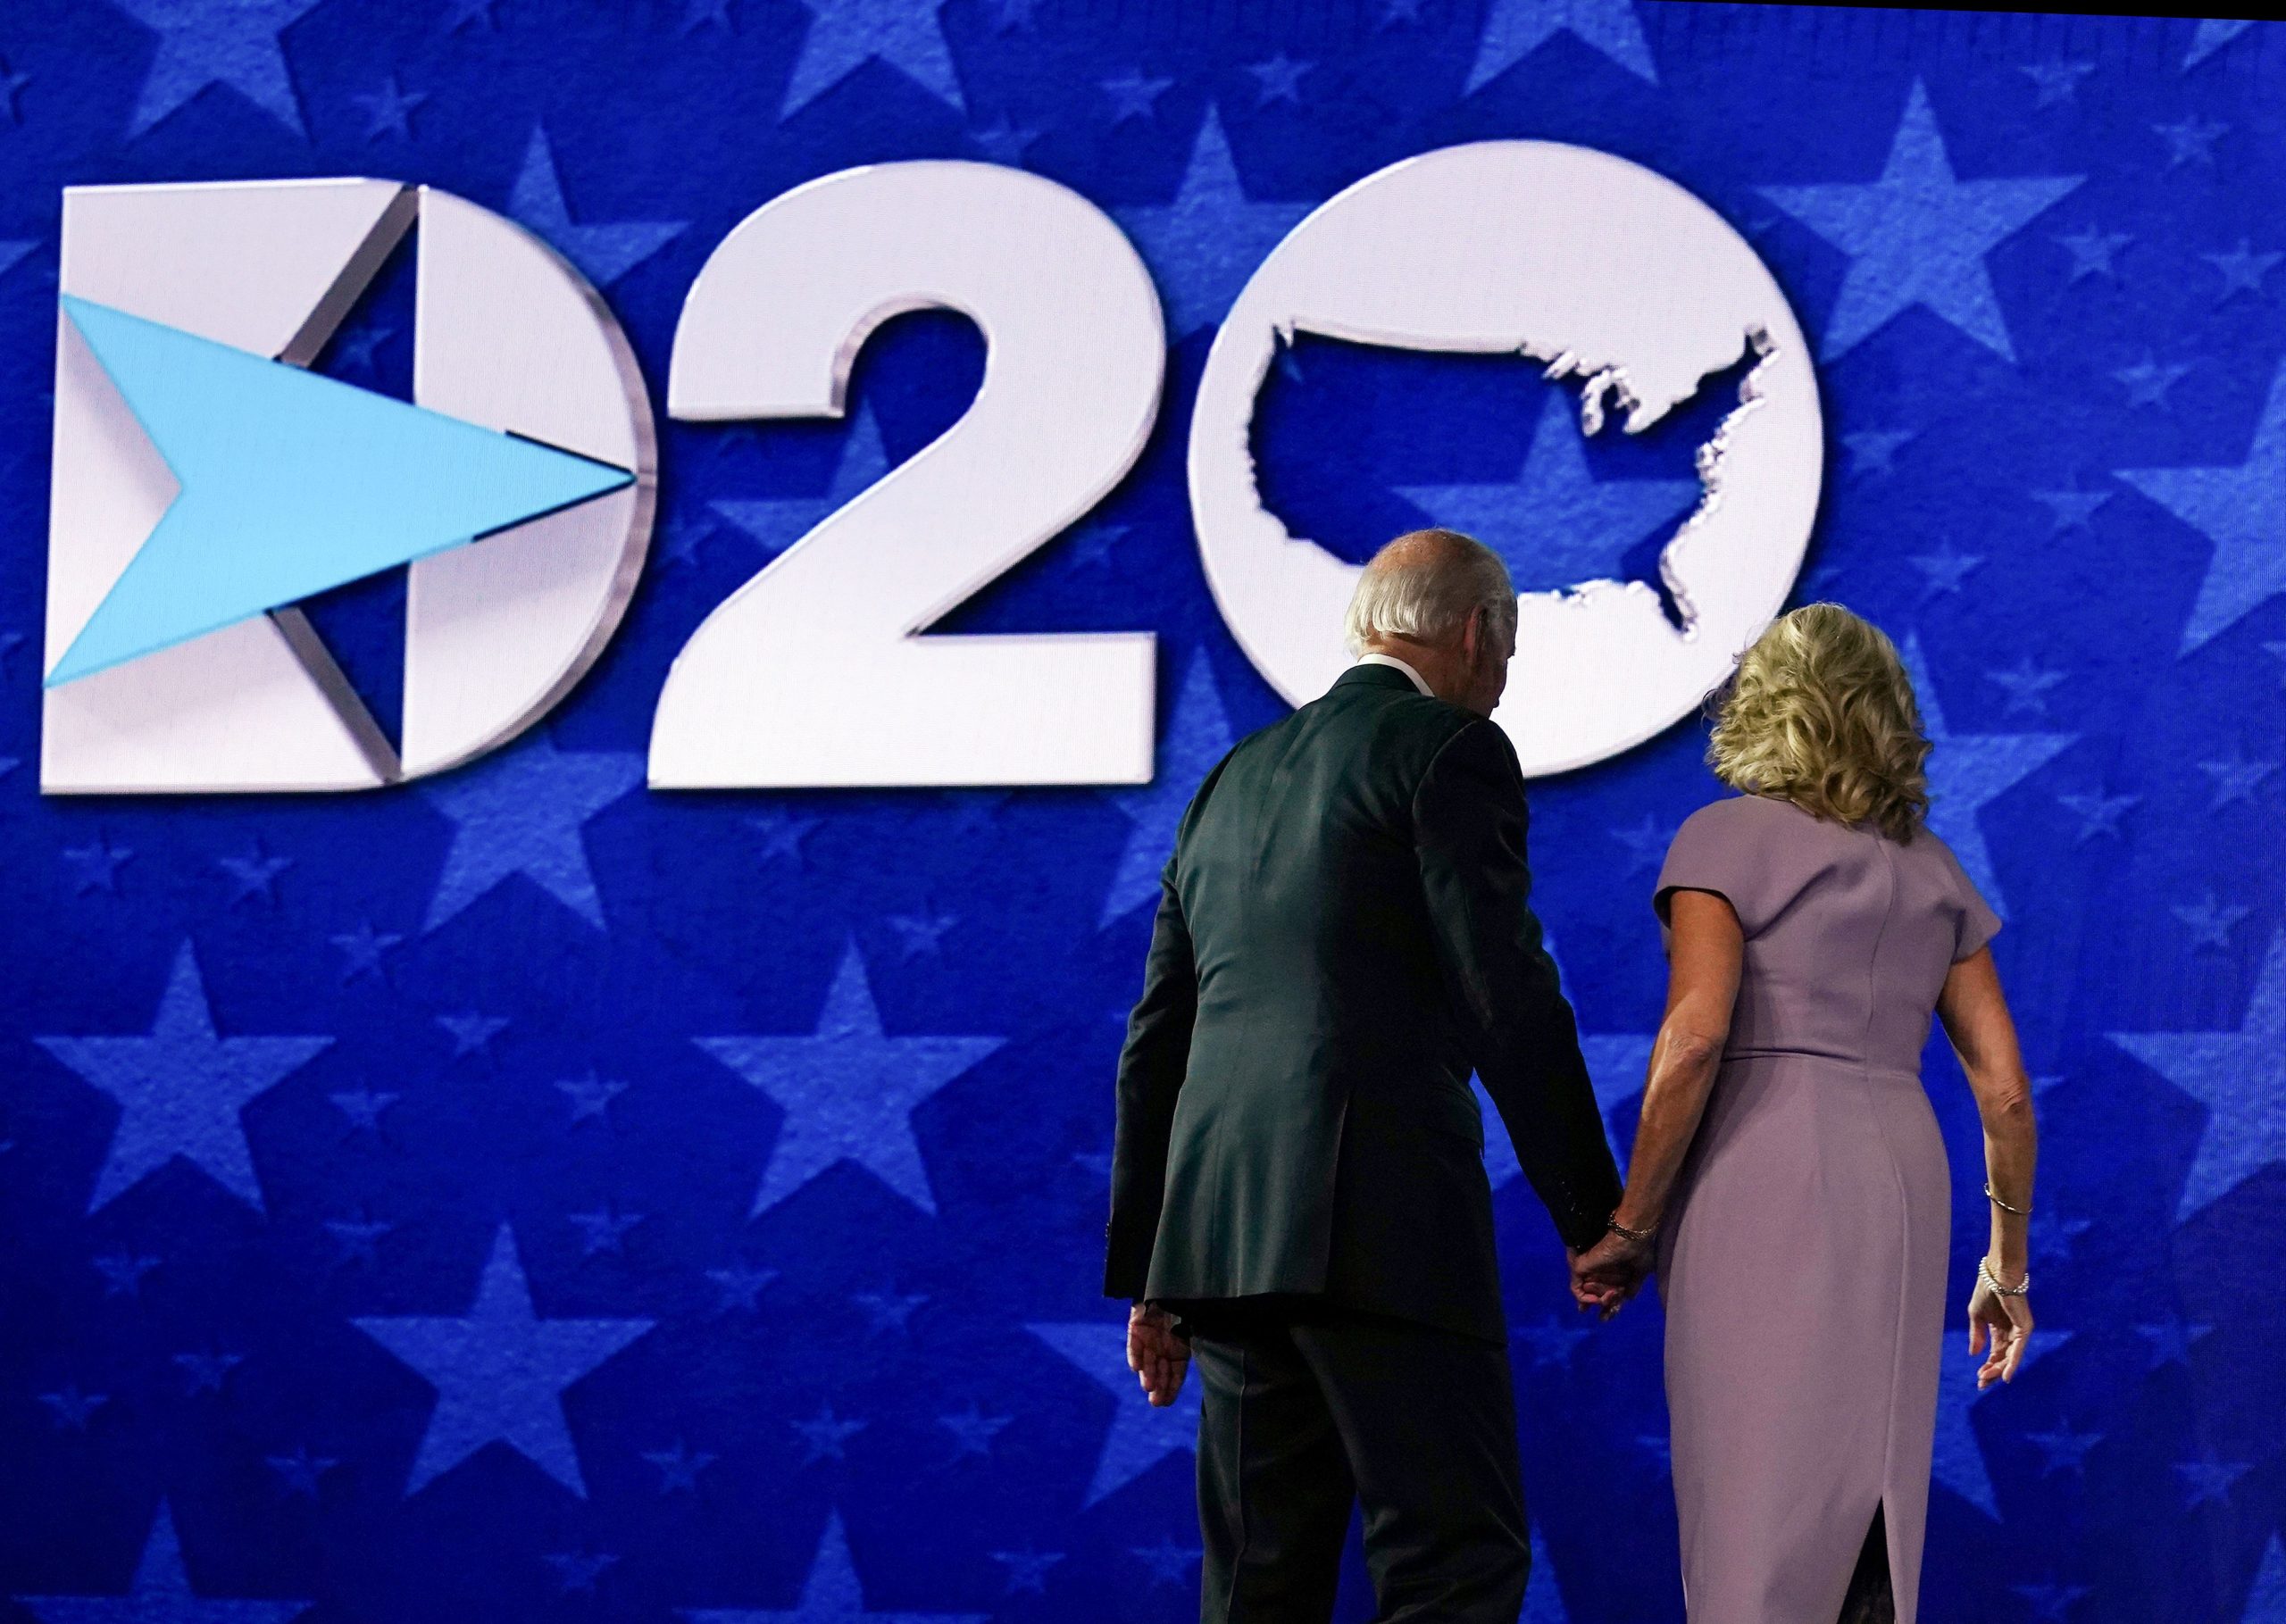 Former vice-president and Democratic presidential nominee Joe Biden and his wife Jill Biden stand on stage after he accepted the Democratic Party nomination for US president during the last day of the Democratic National Convention, being held virtually amid the novel coronavirus pandemic, at the Chase Center in Wilmington, Delaware on August 20, 2020. (Photo by Olivier DOULIERY / AFP) (Photo by OLIVIER DOULIERY/AFP via Getty Images)